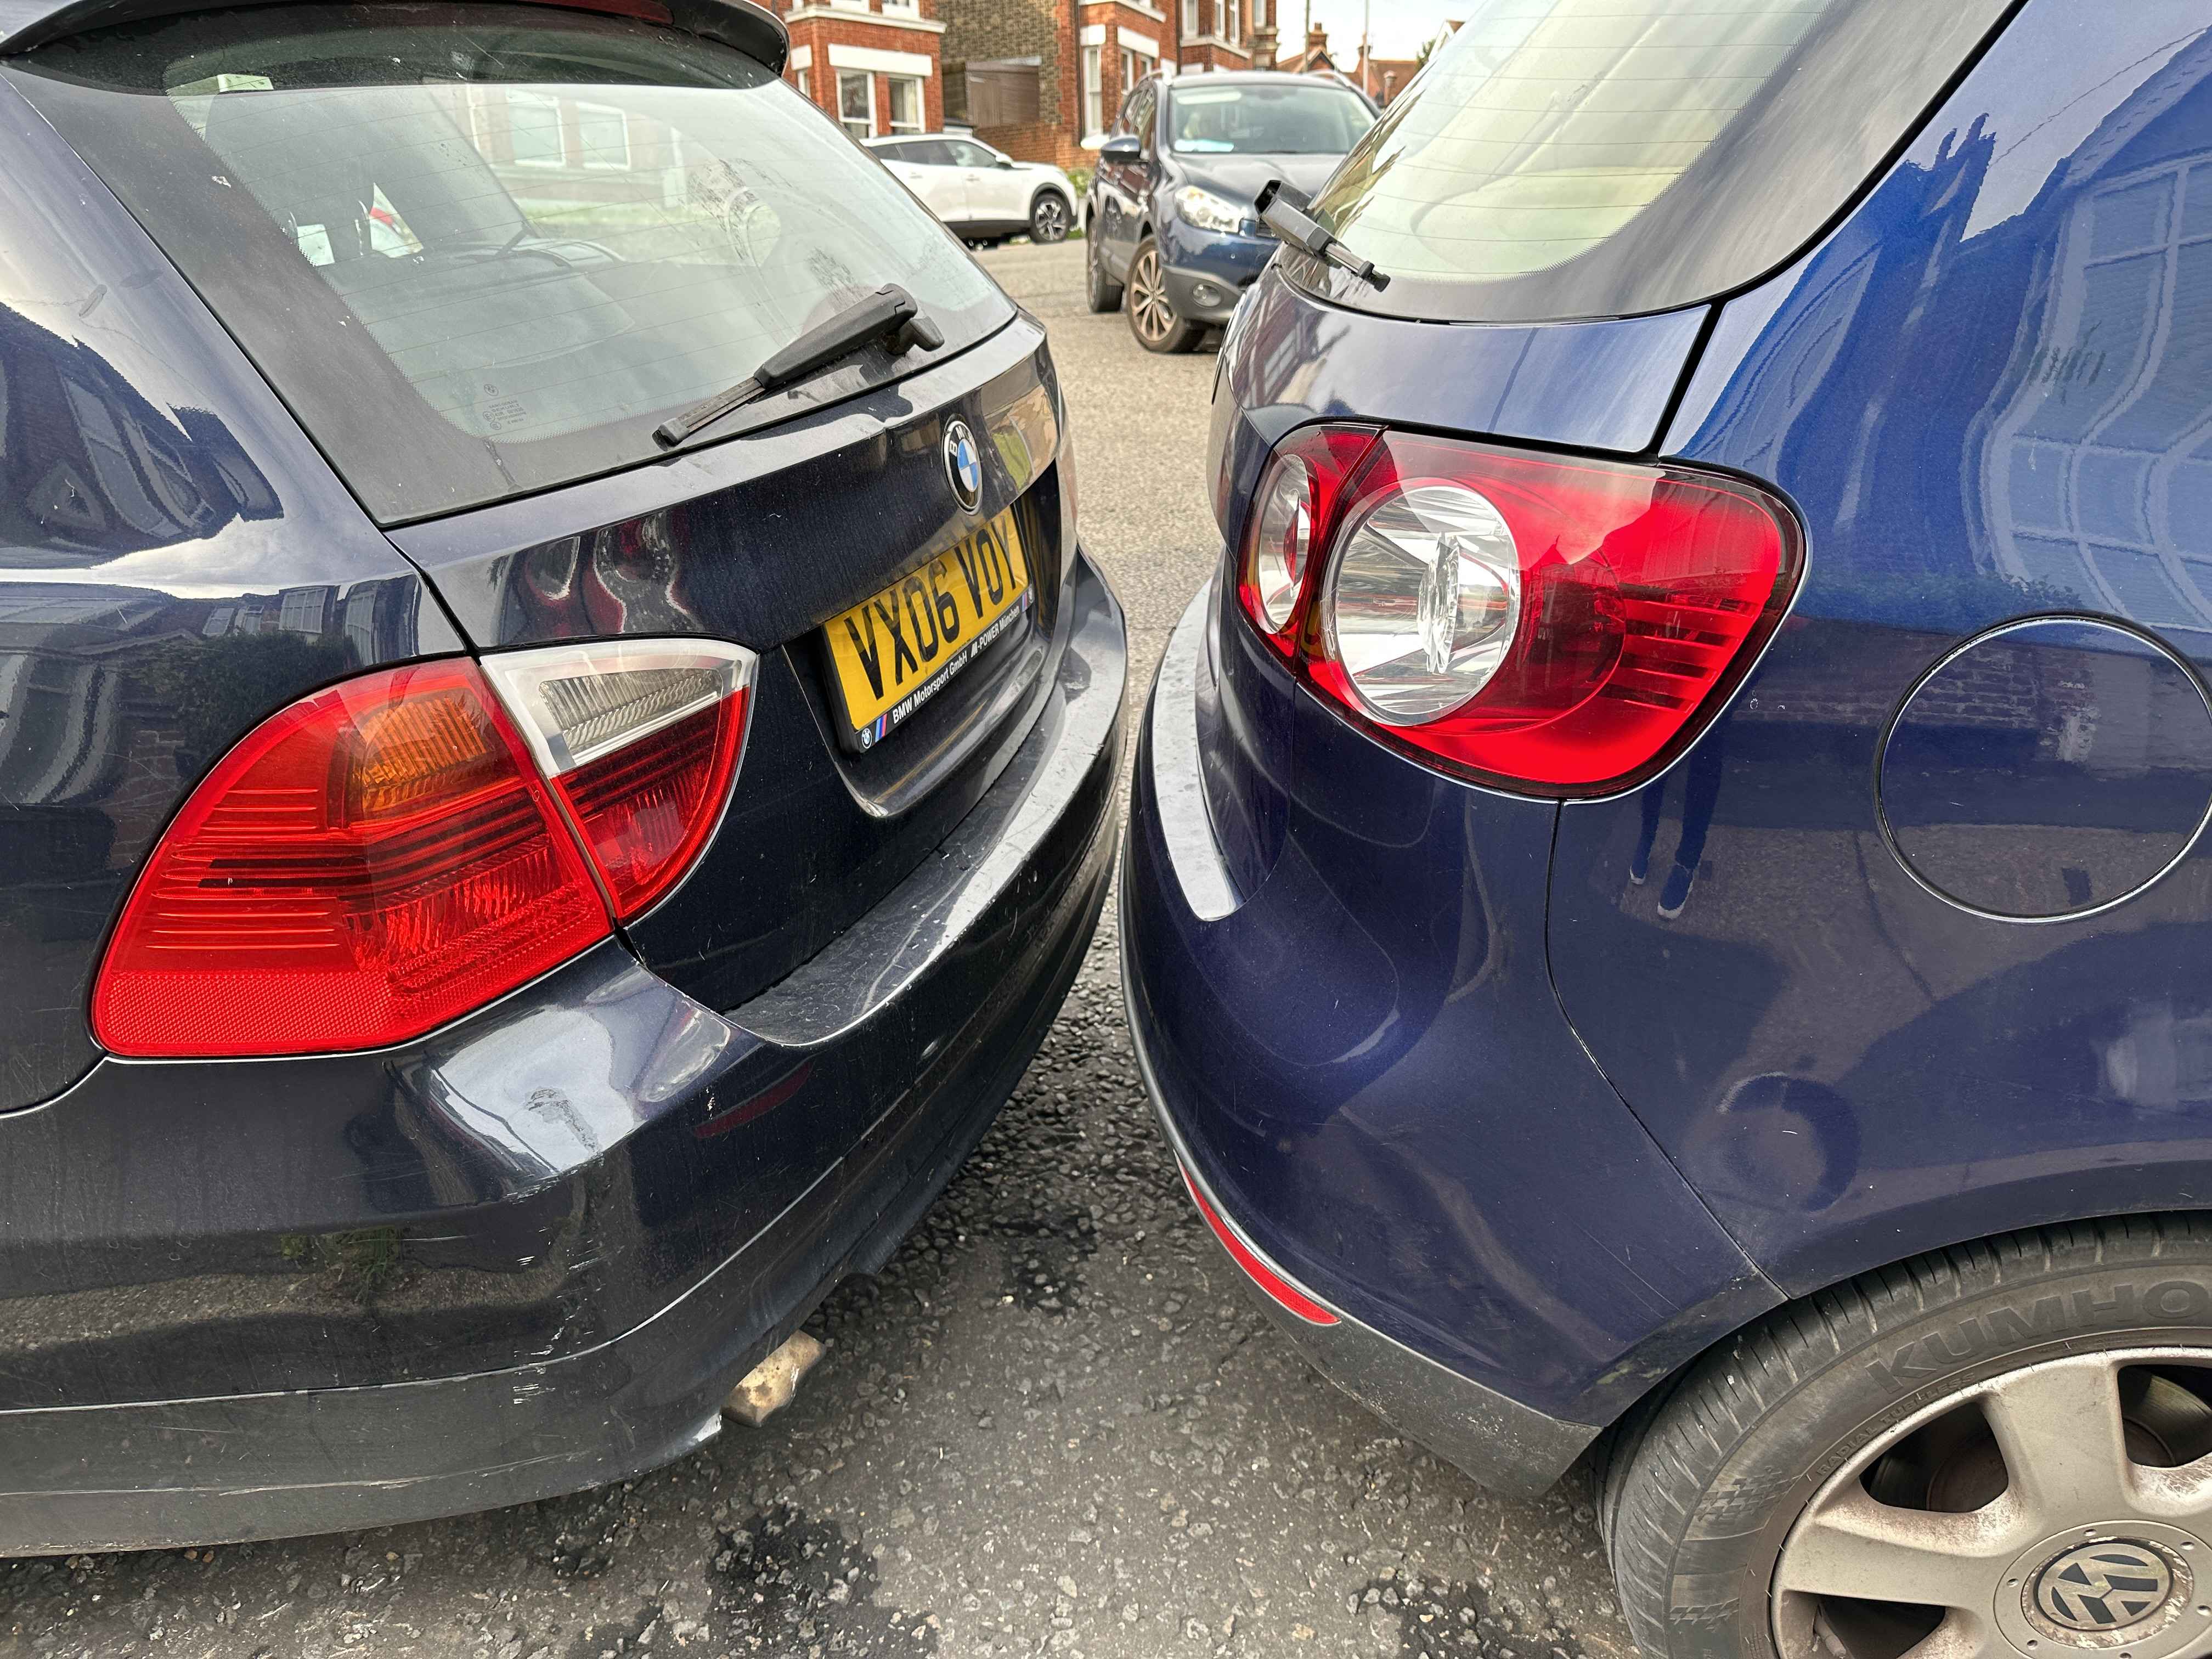 Photograph of VX06 VOY - a Blue BMW 3 Series parked in Hollingdean by a non-resident who uses the local area as part of their Brighton commute. The second of two photographs supplied by the residents of Hollingdean.